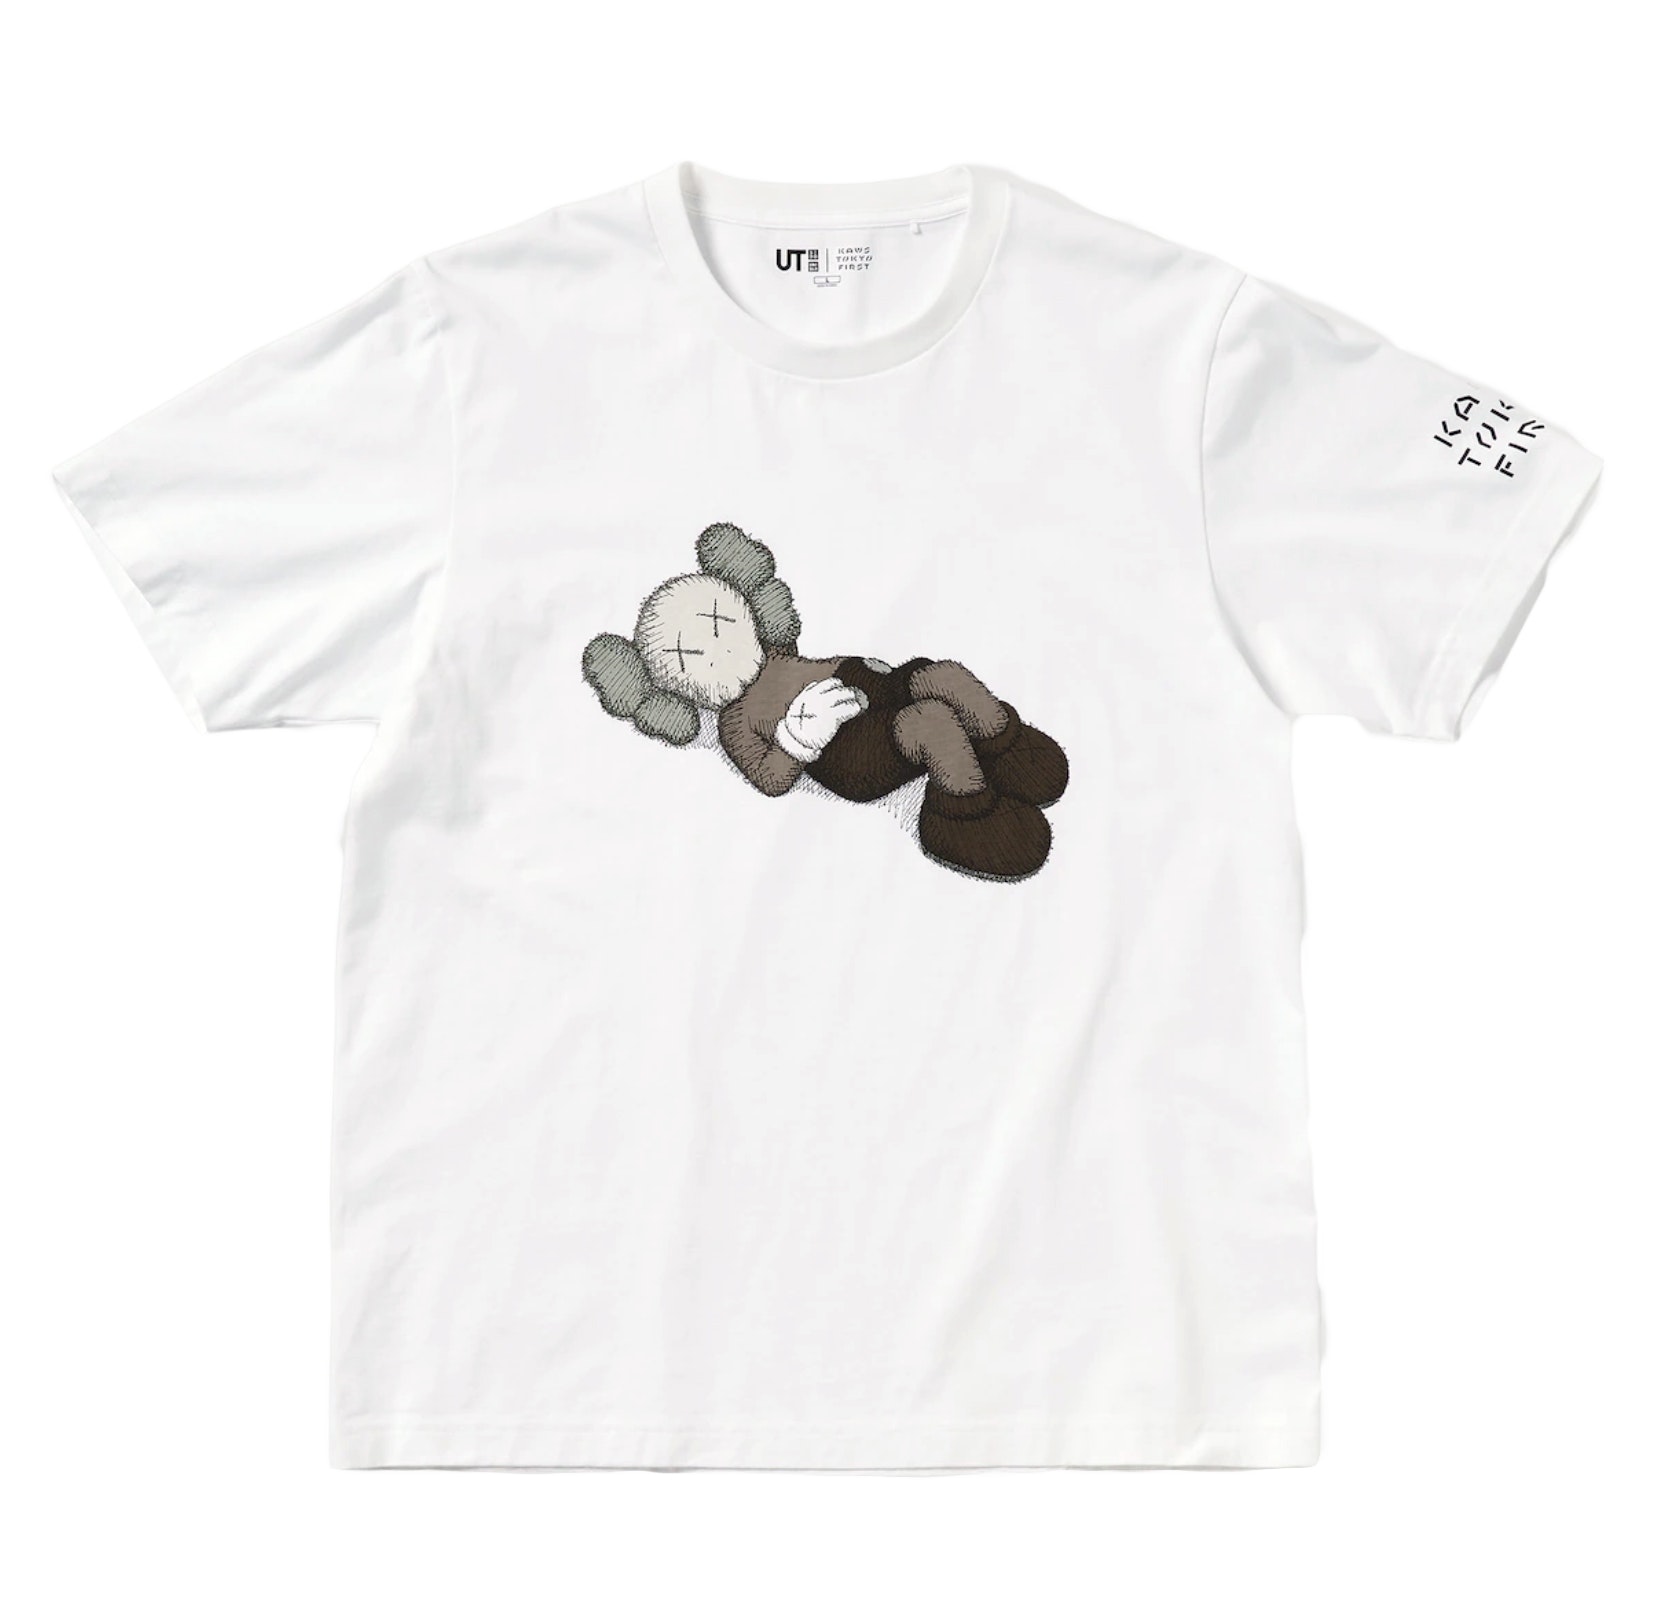 S size KAWS x Uniqlo UT Summer '19 collection $35